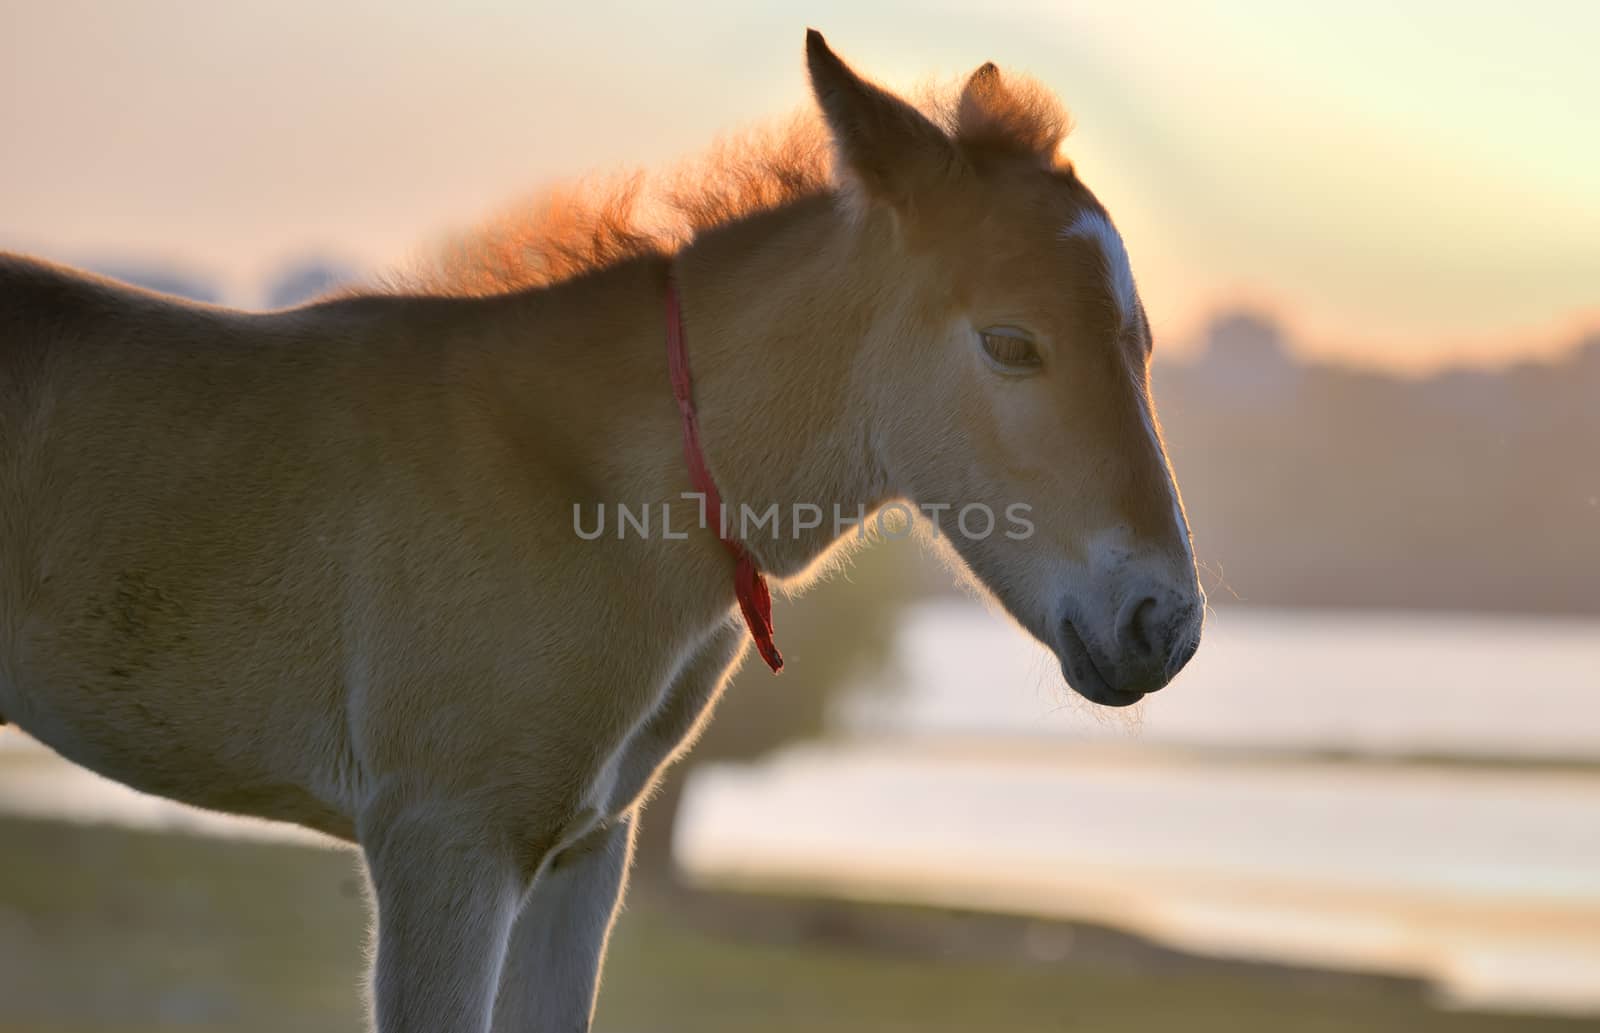 New young foal on field at sunset